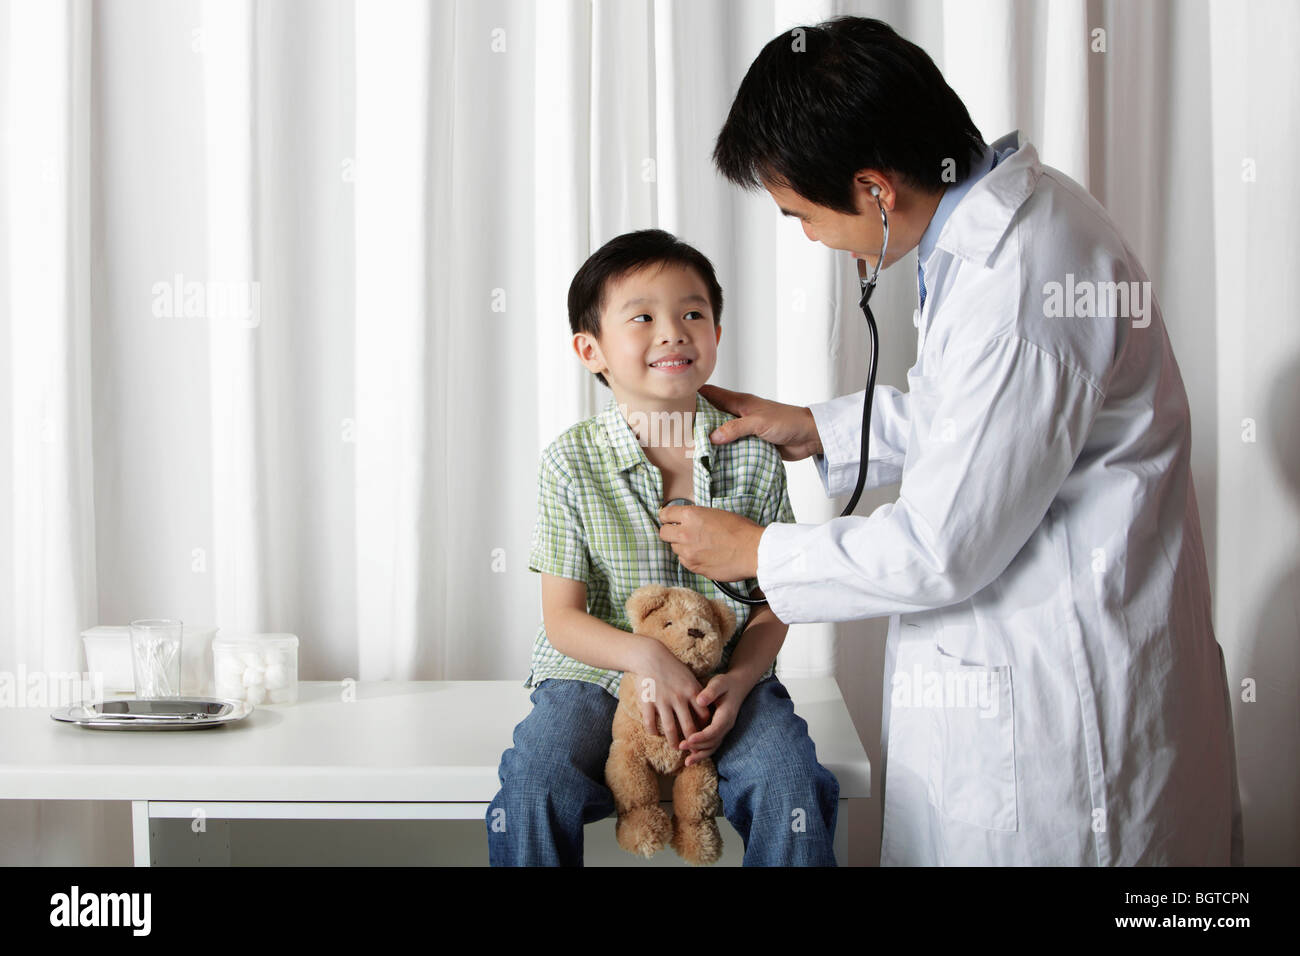 Doctor giving a little boy a check up Stock Photo